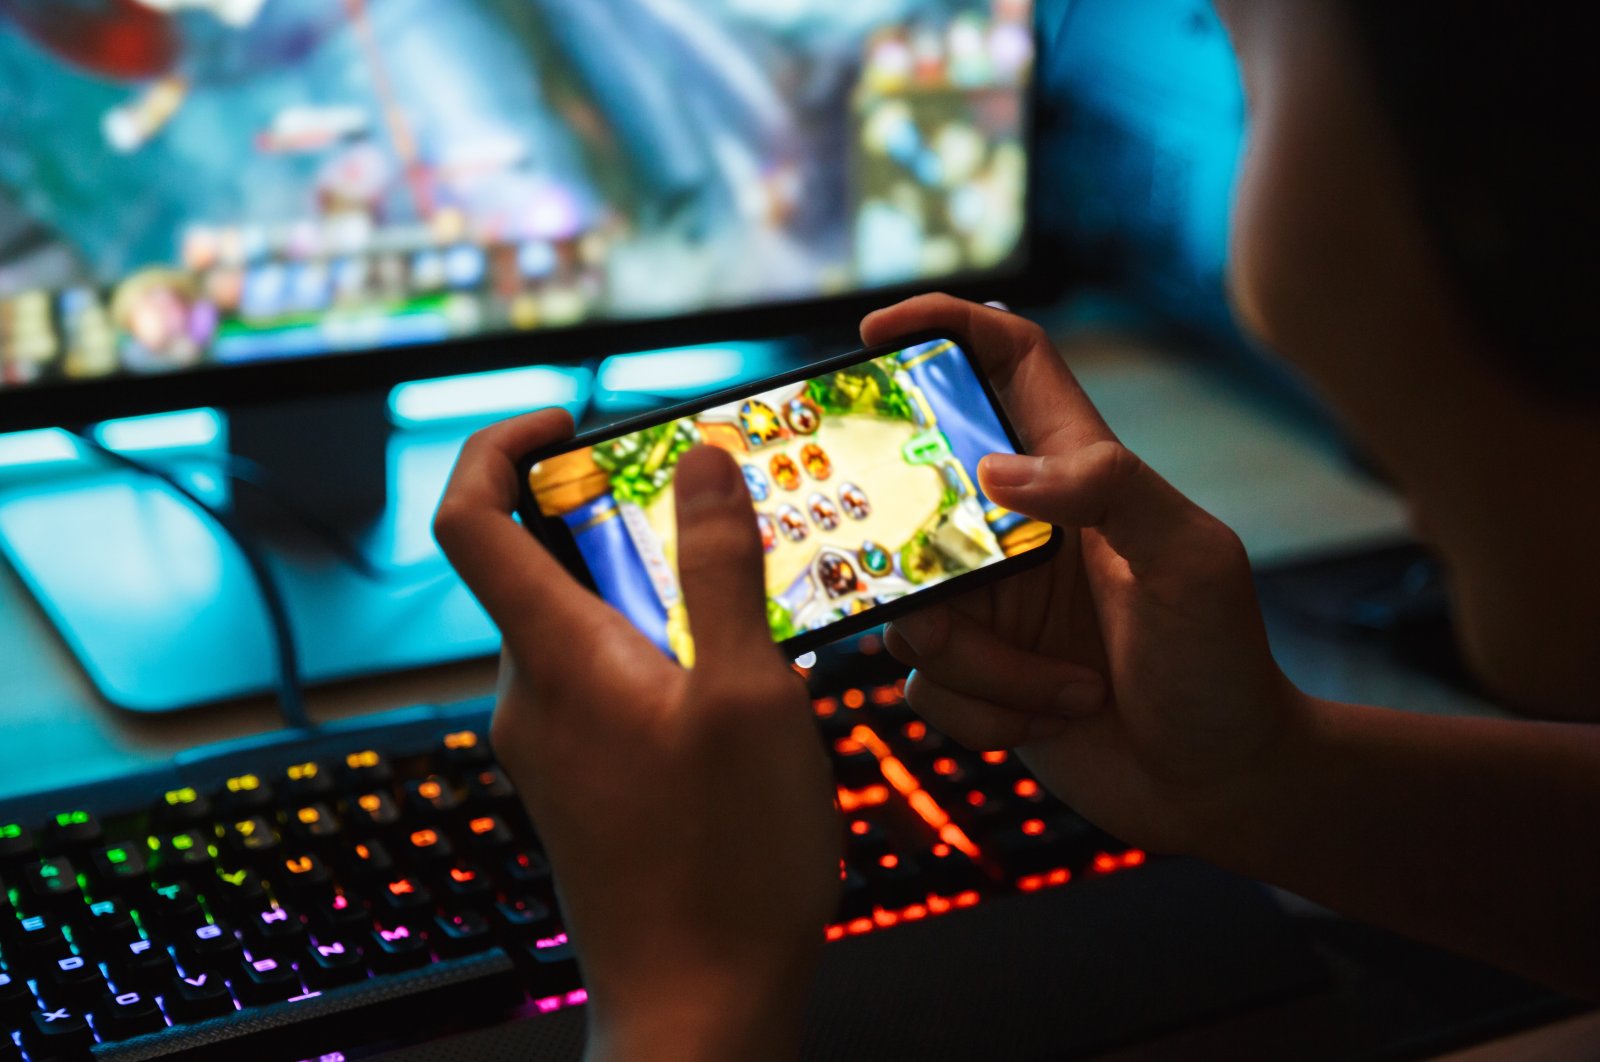 Turkish students spend 3 hrs daily playing video games: Study